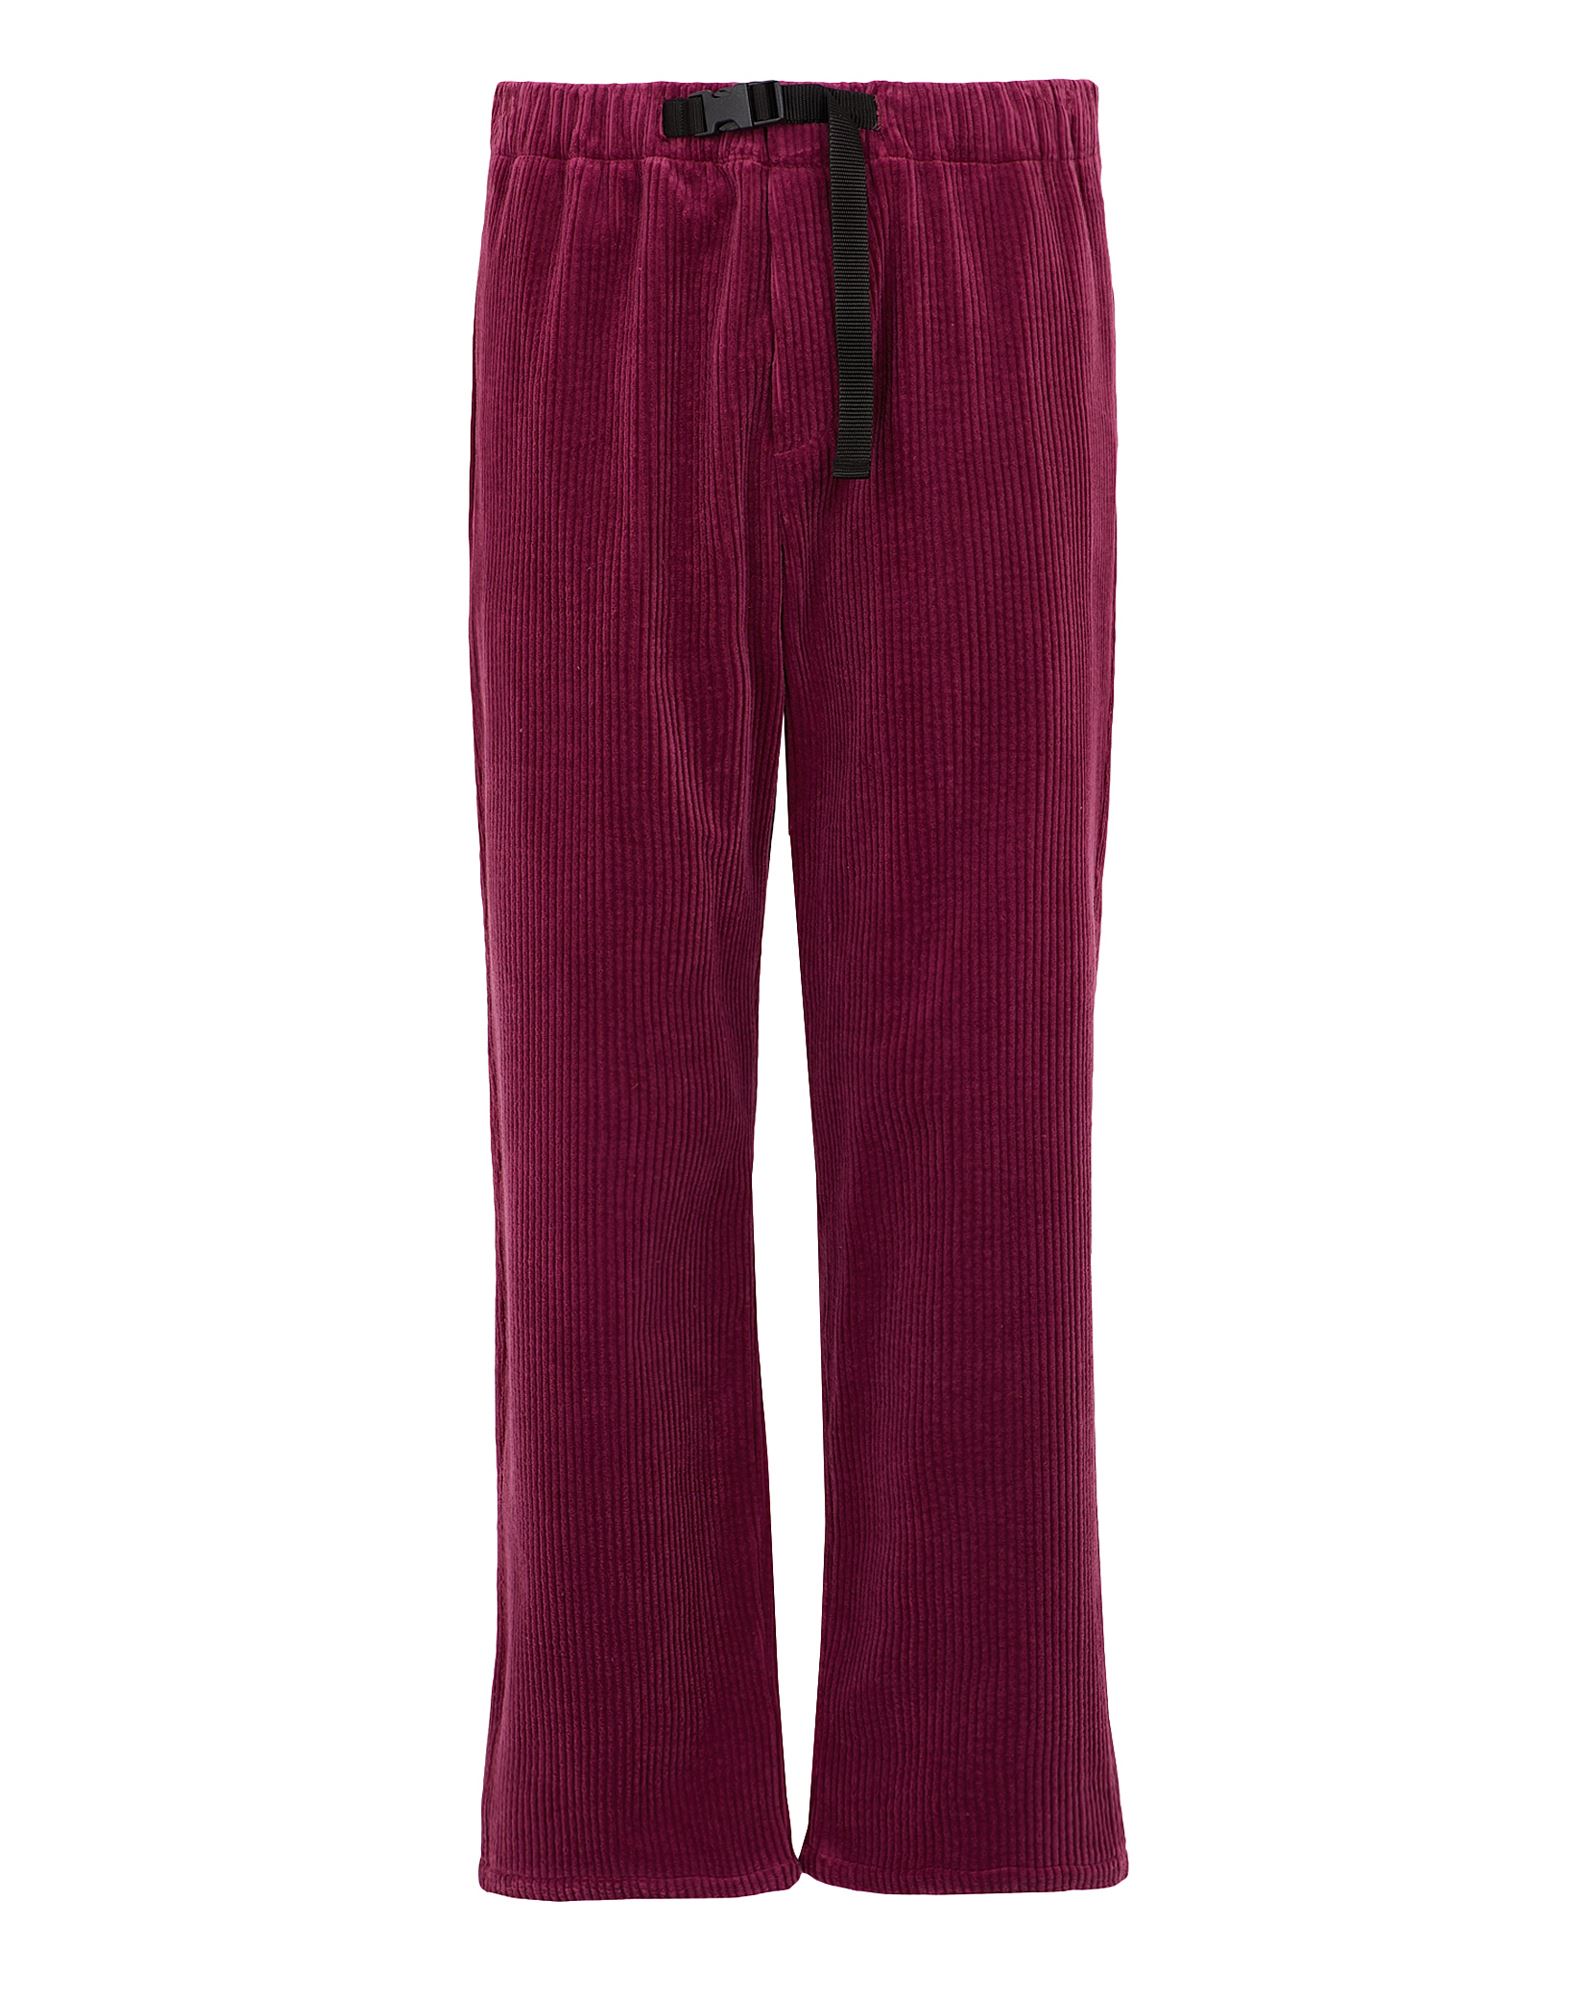 8 By Yoox Pants In Red